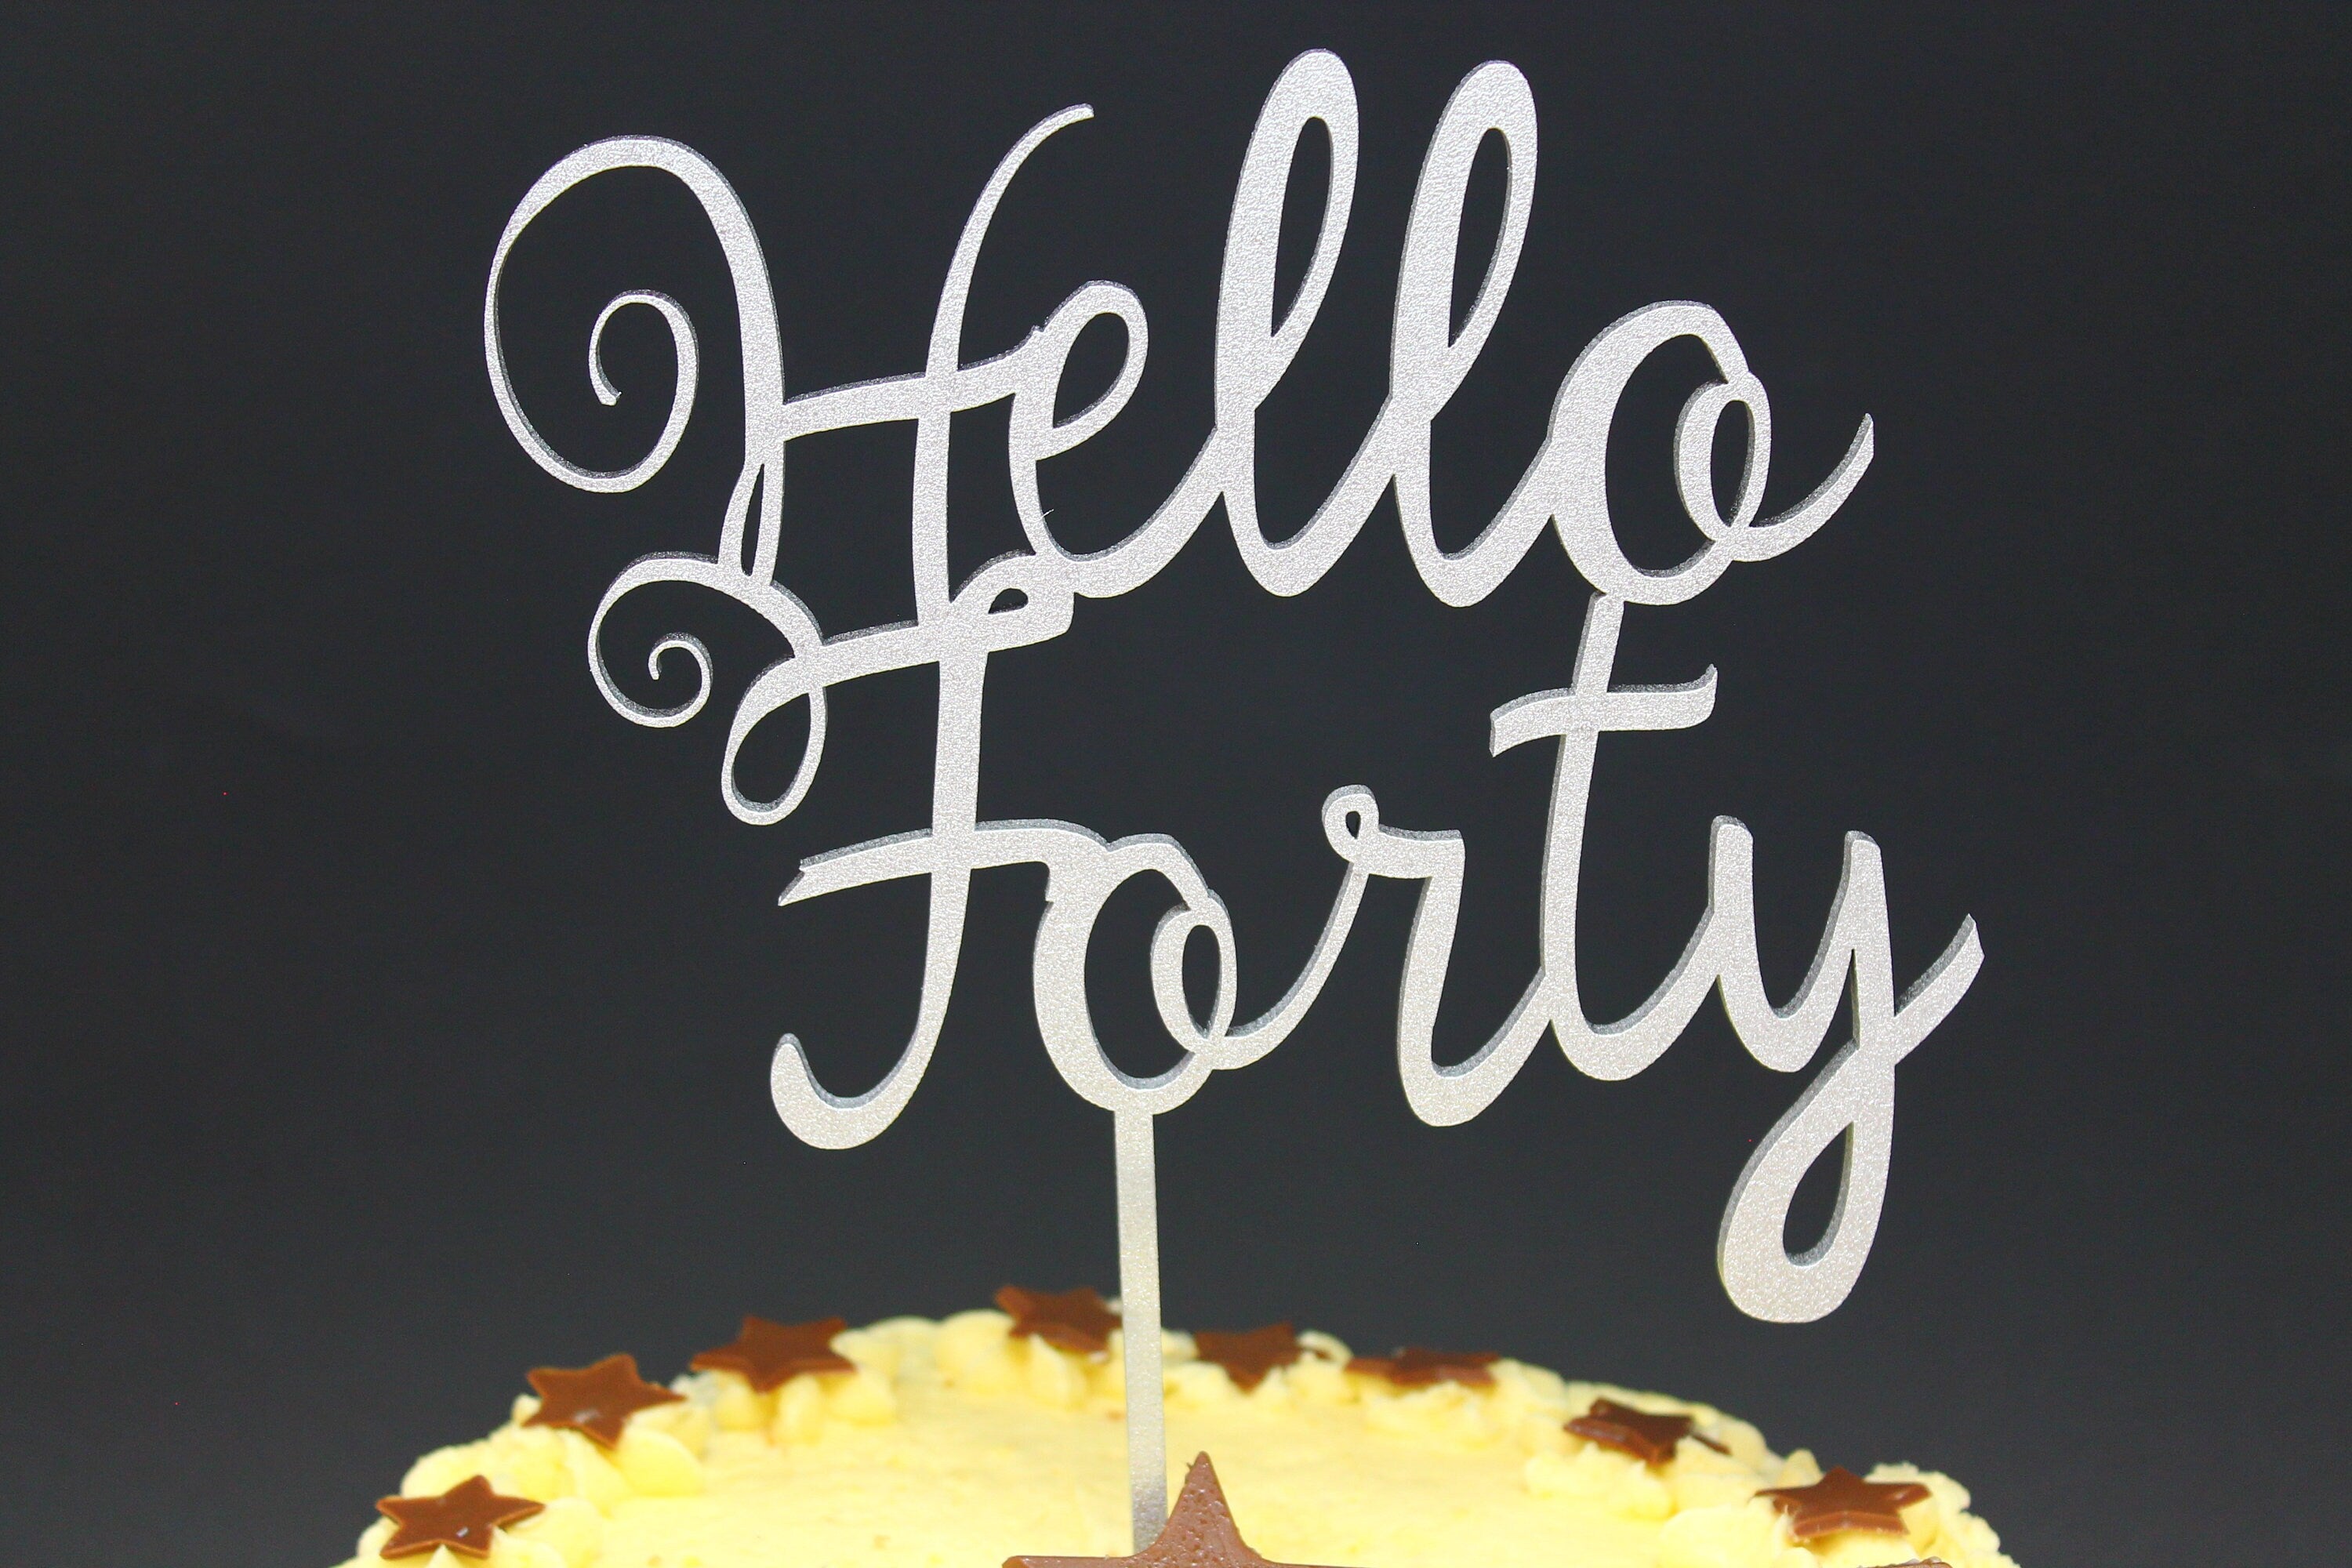 Cake Topper Hello Forty, Fify Sixty and more Mile Stone Years Luxury Premium Topper Keepsake